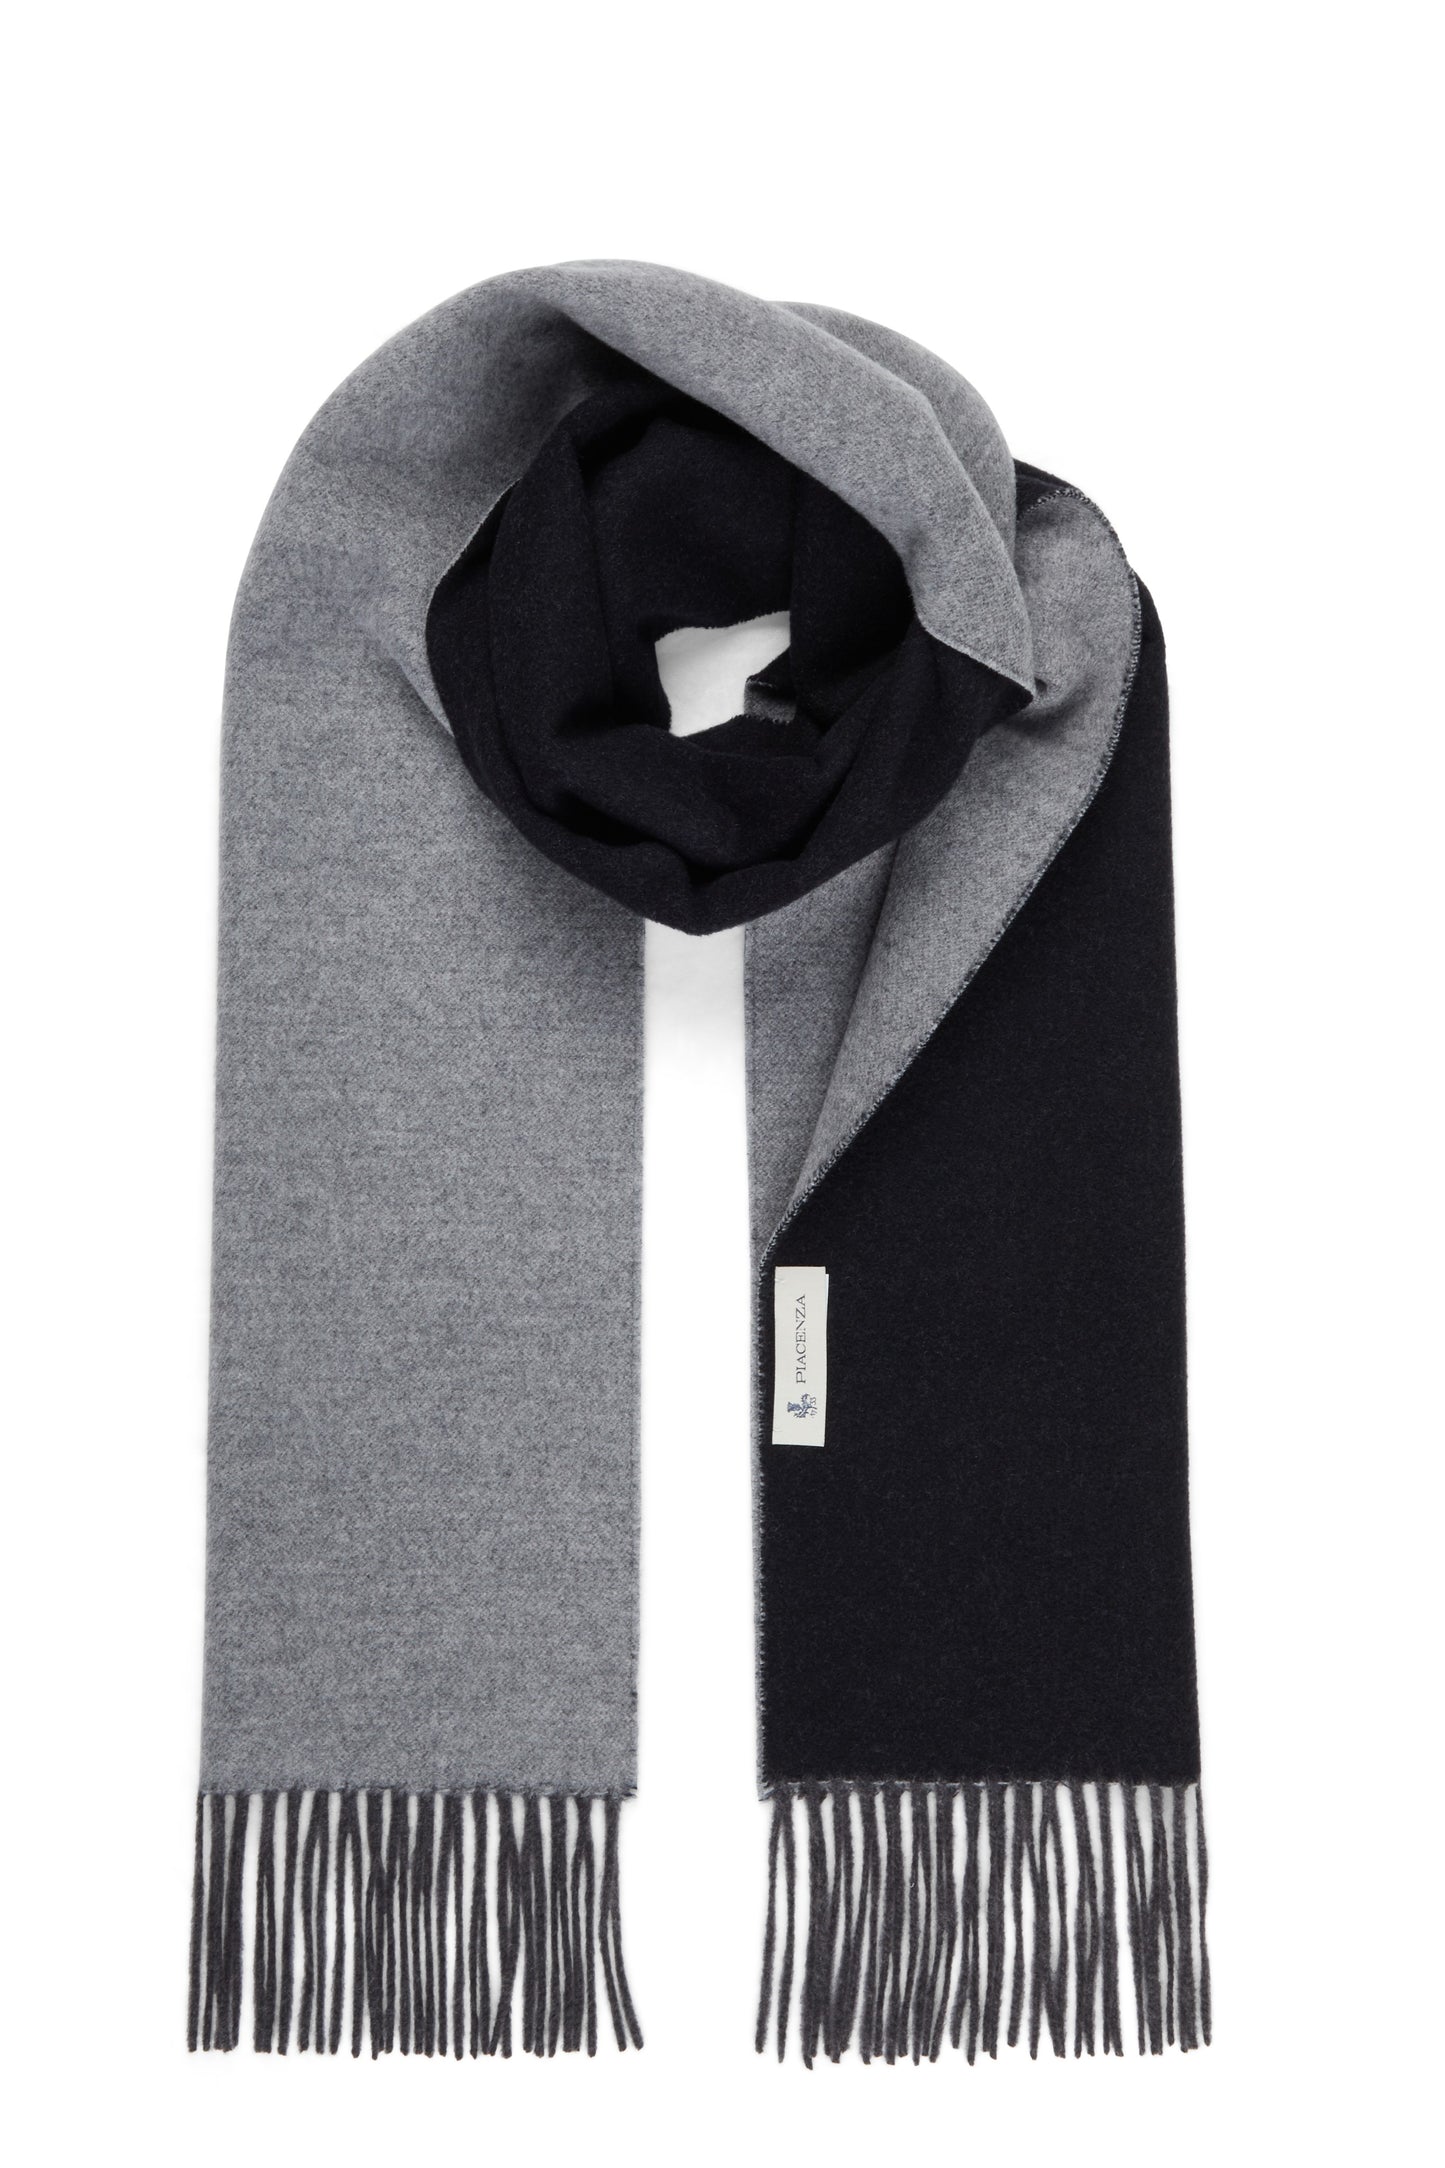 Gray and black Eternity scarf in pure Alashan Cashmere